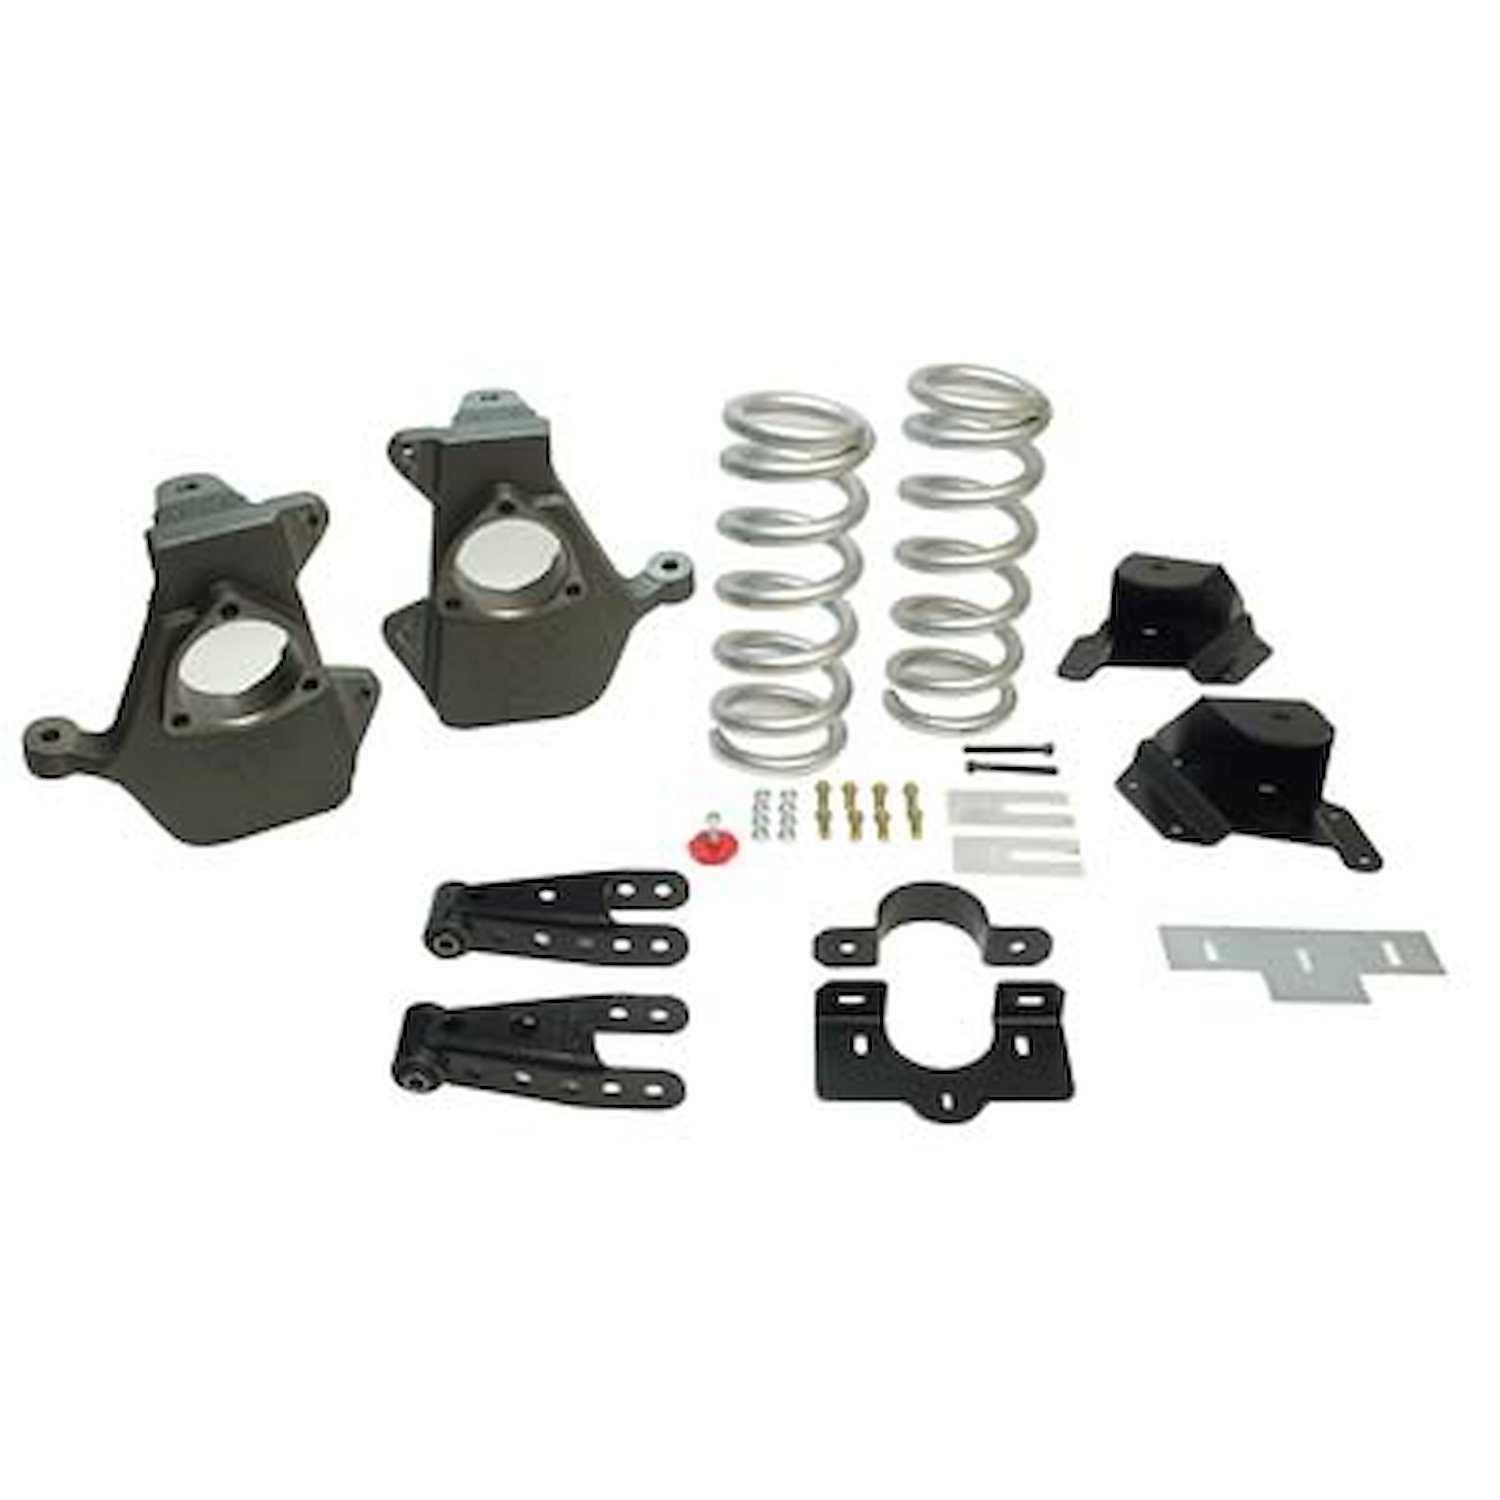 Complete Lowering Kit for 1971-1972 Chevy C10/C15